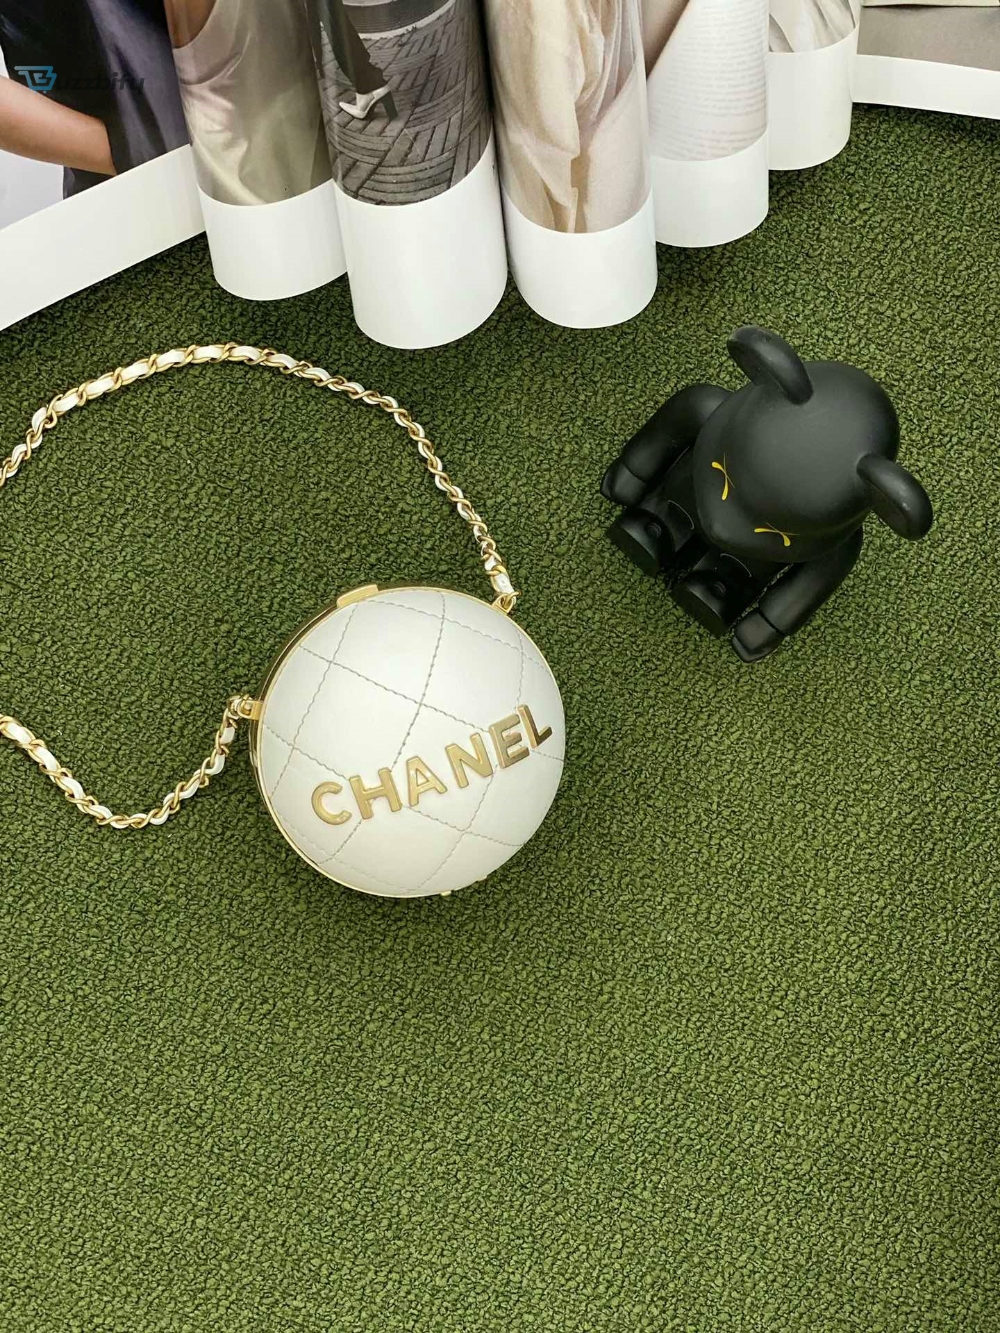 Chanel Ball Bag White and Gold Chain Bag For Women 8cm/3.15in
